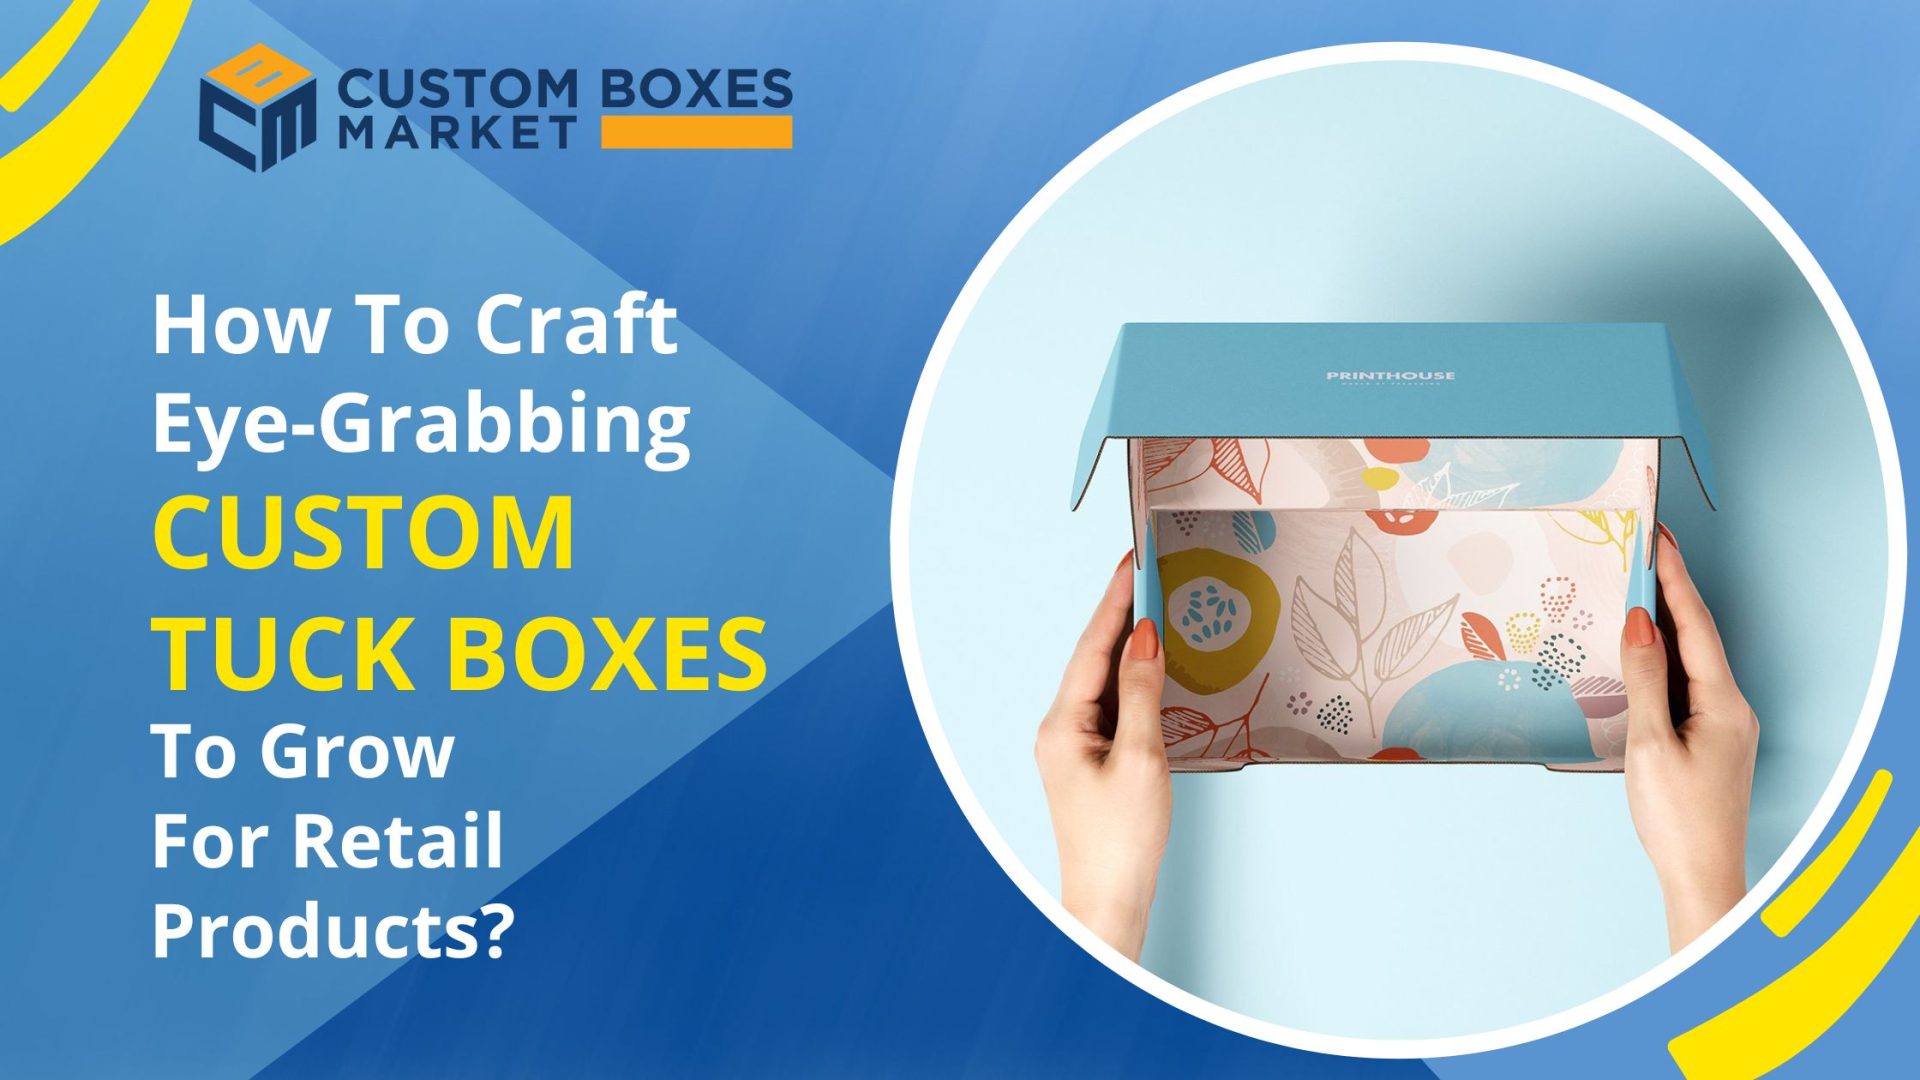 How To Craft Eye-Grabbing Custom Tuck Boxes For Retail Products